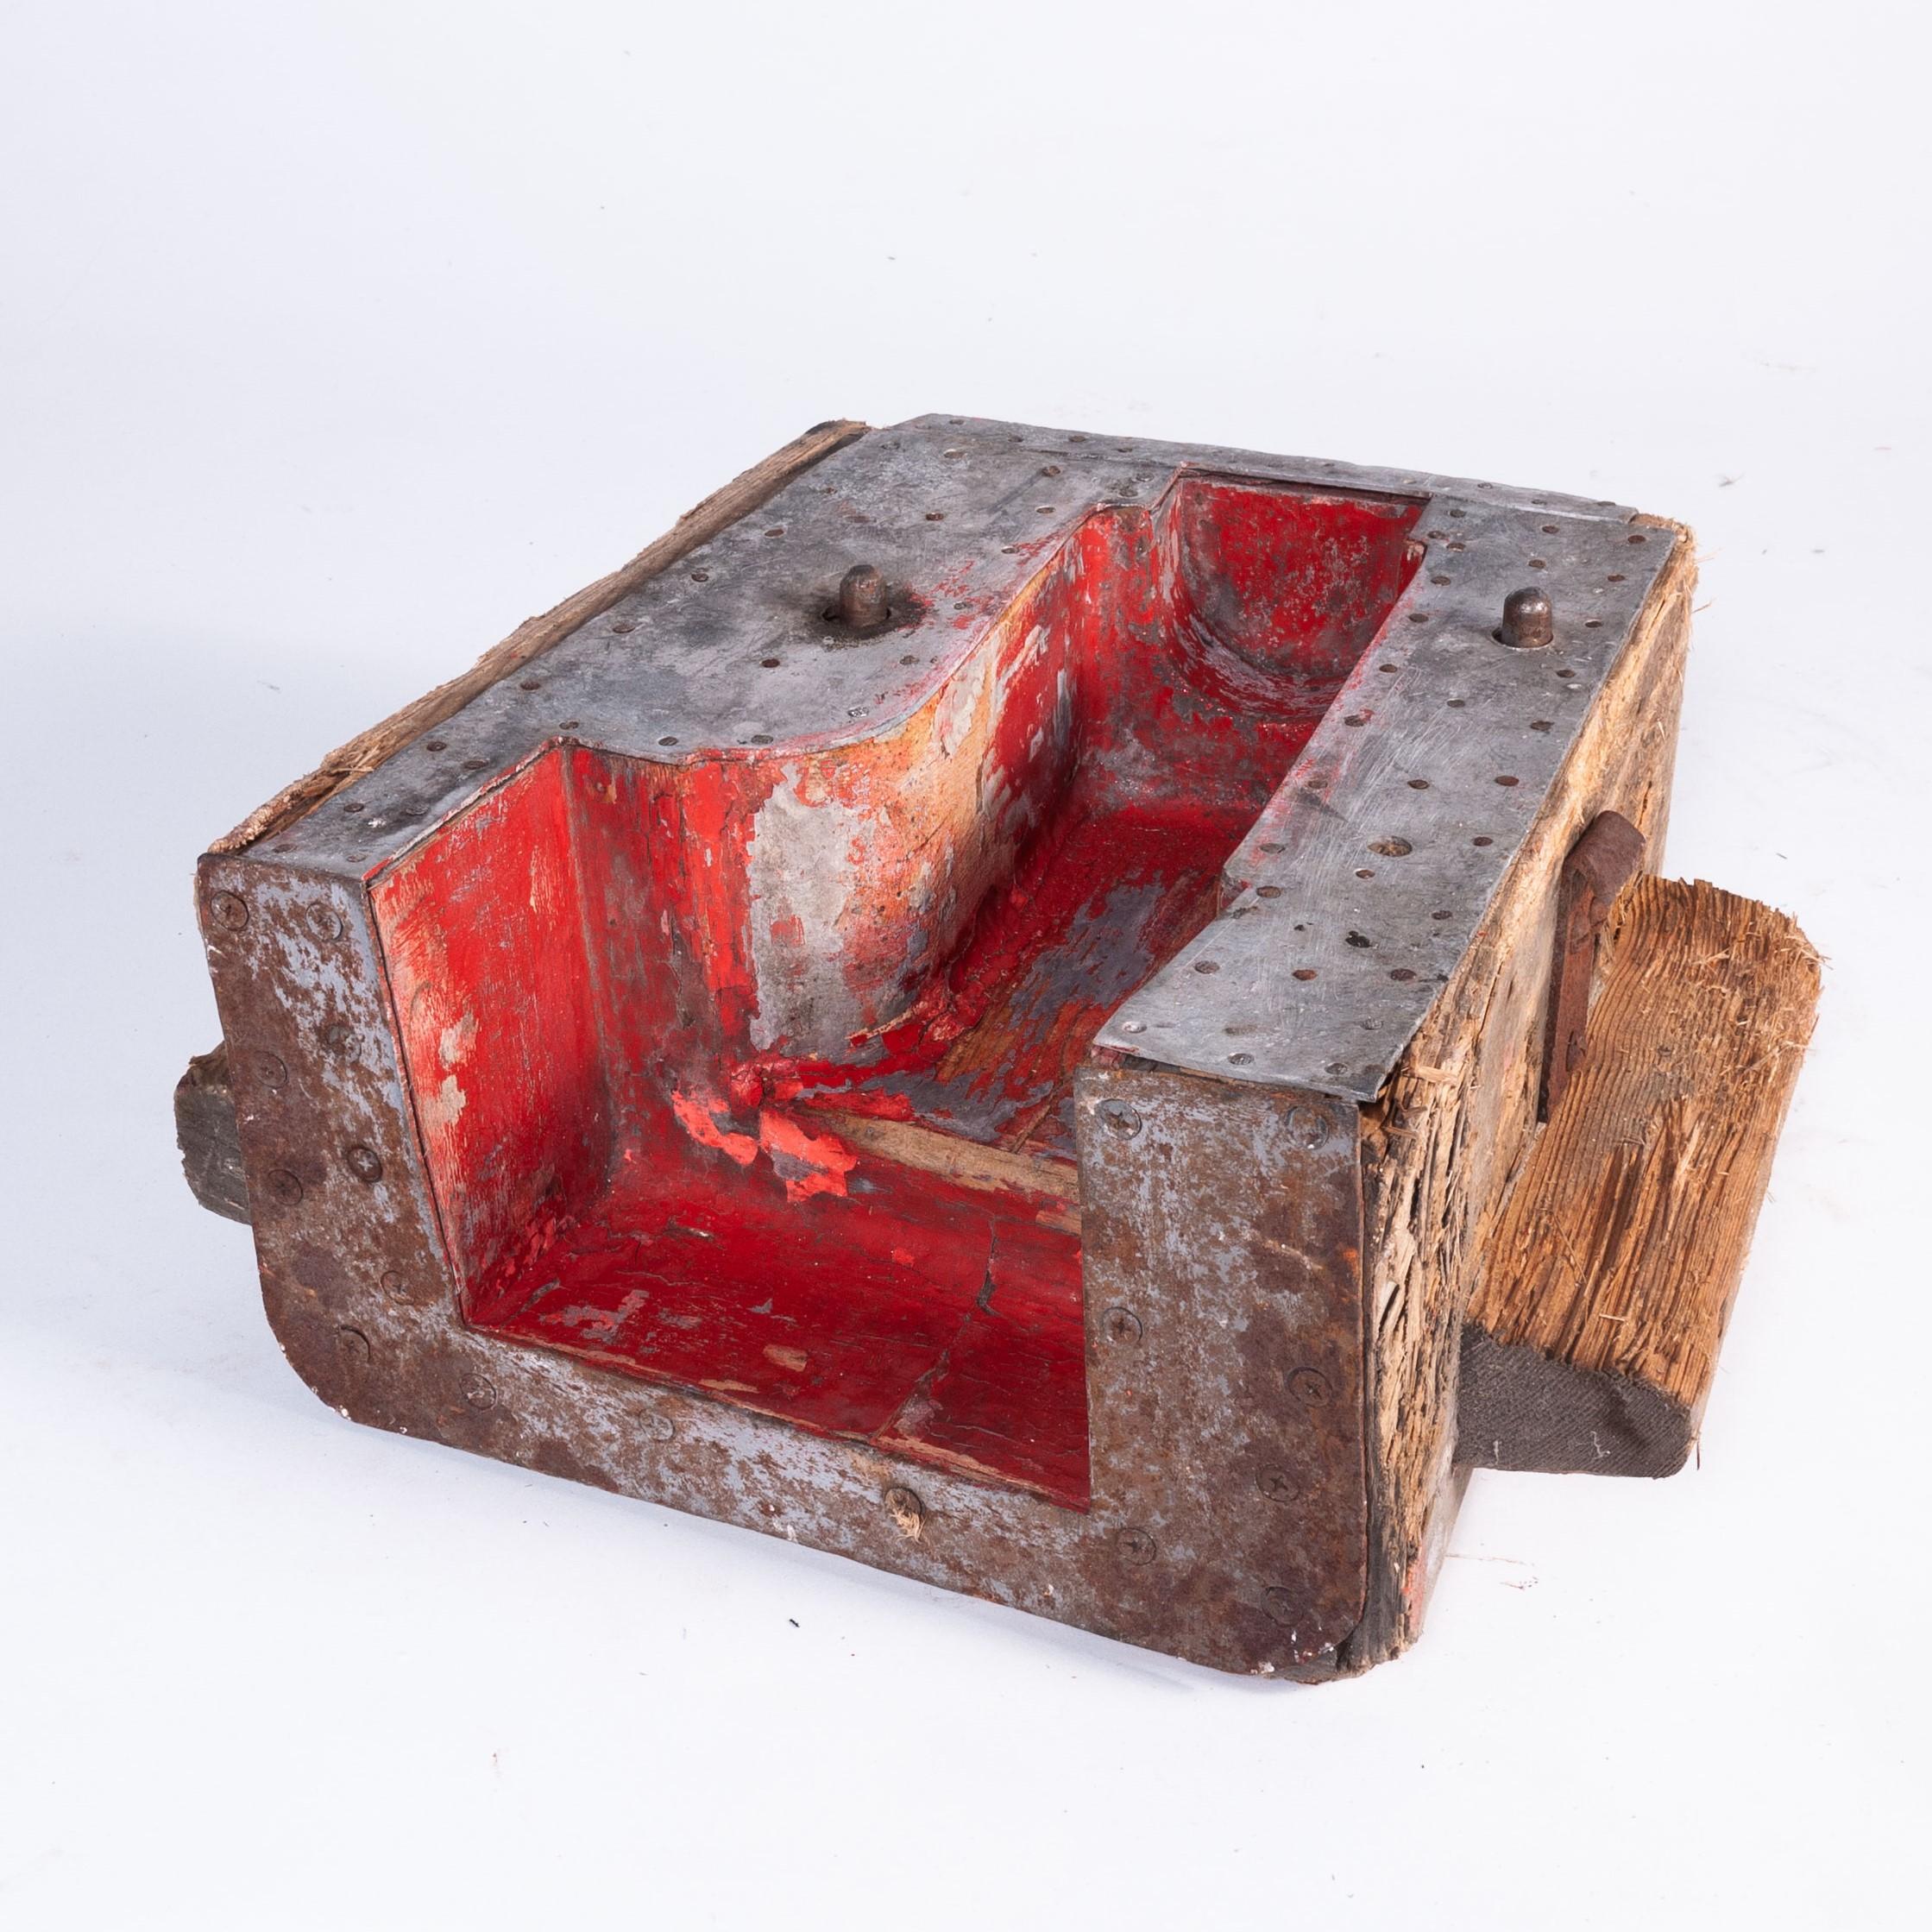 1960s industrial decorative foundry casting mould
1960s vintage industrial decorative foundry casting mould. These amazing sculptural pieces are the ‘male’ form used to form the ‘female’ shape in the process of sand casting. Each one is hand cut